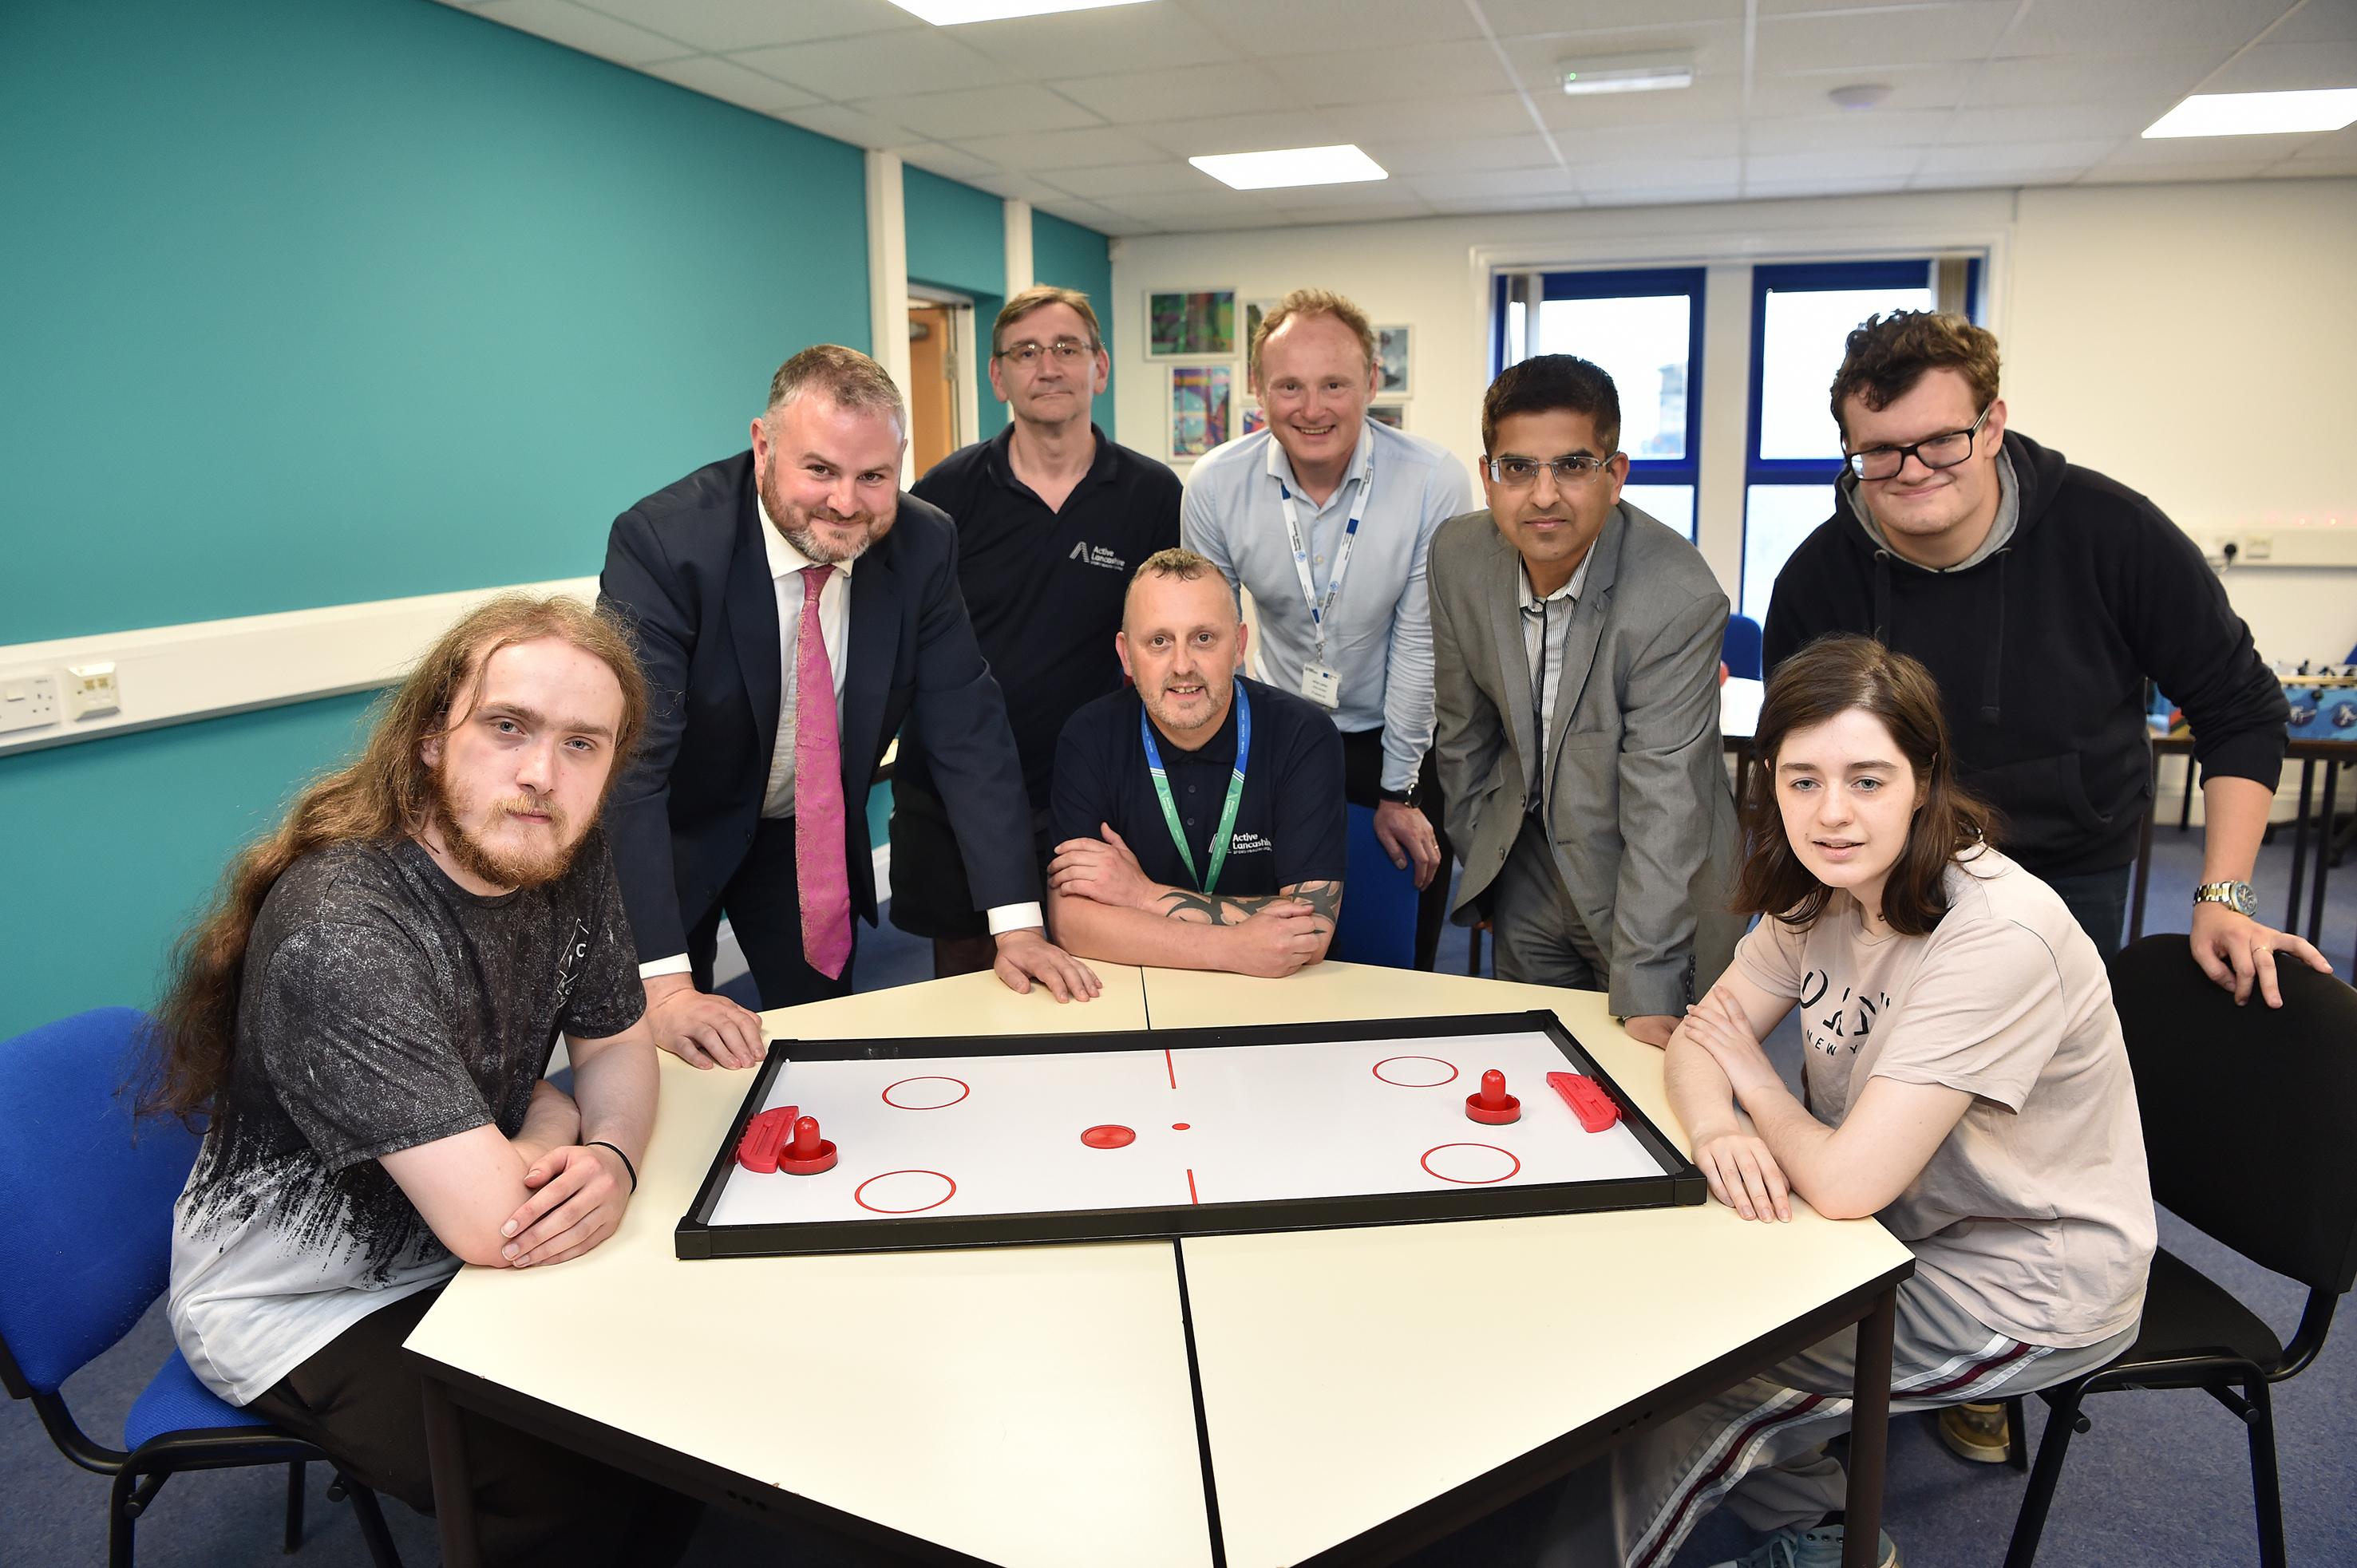 Funding success to extend Pendle YES Hub for 16 – 24 year olds